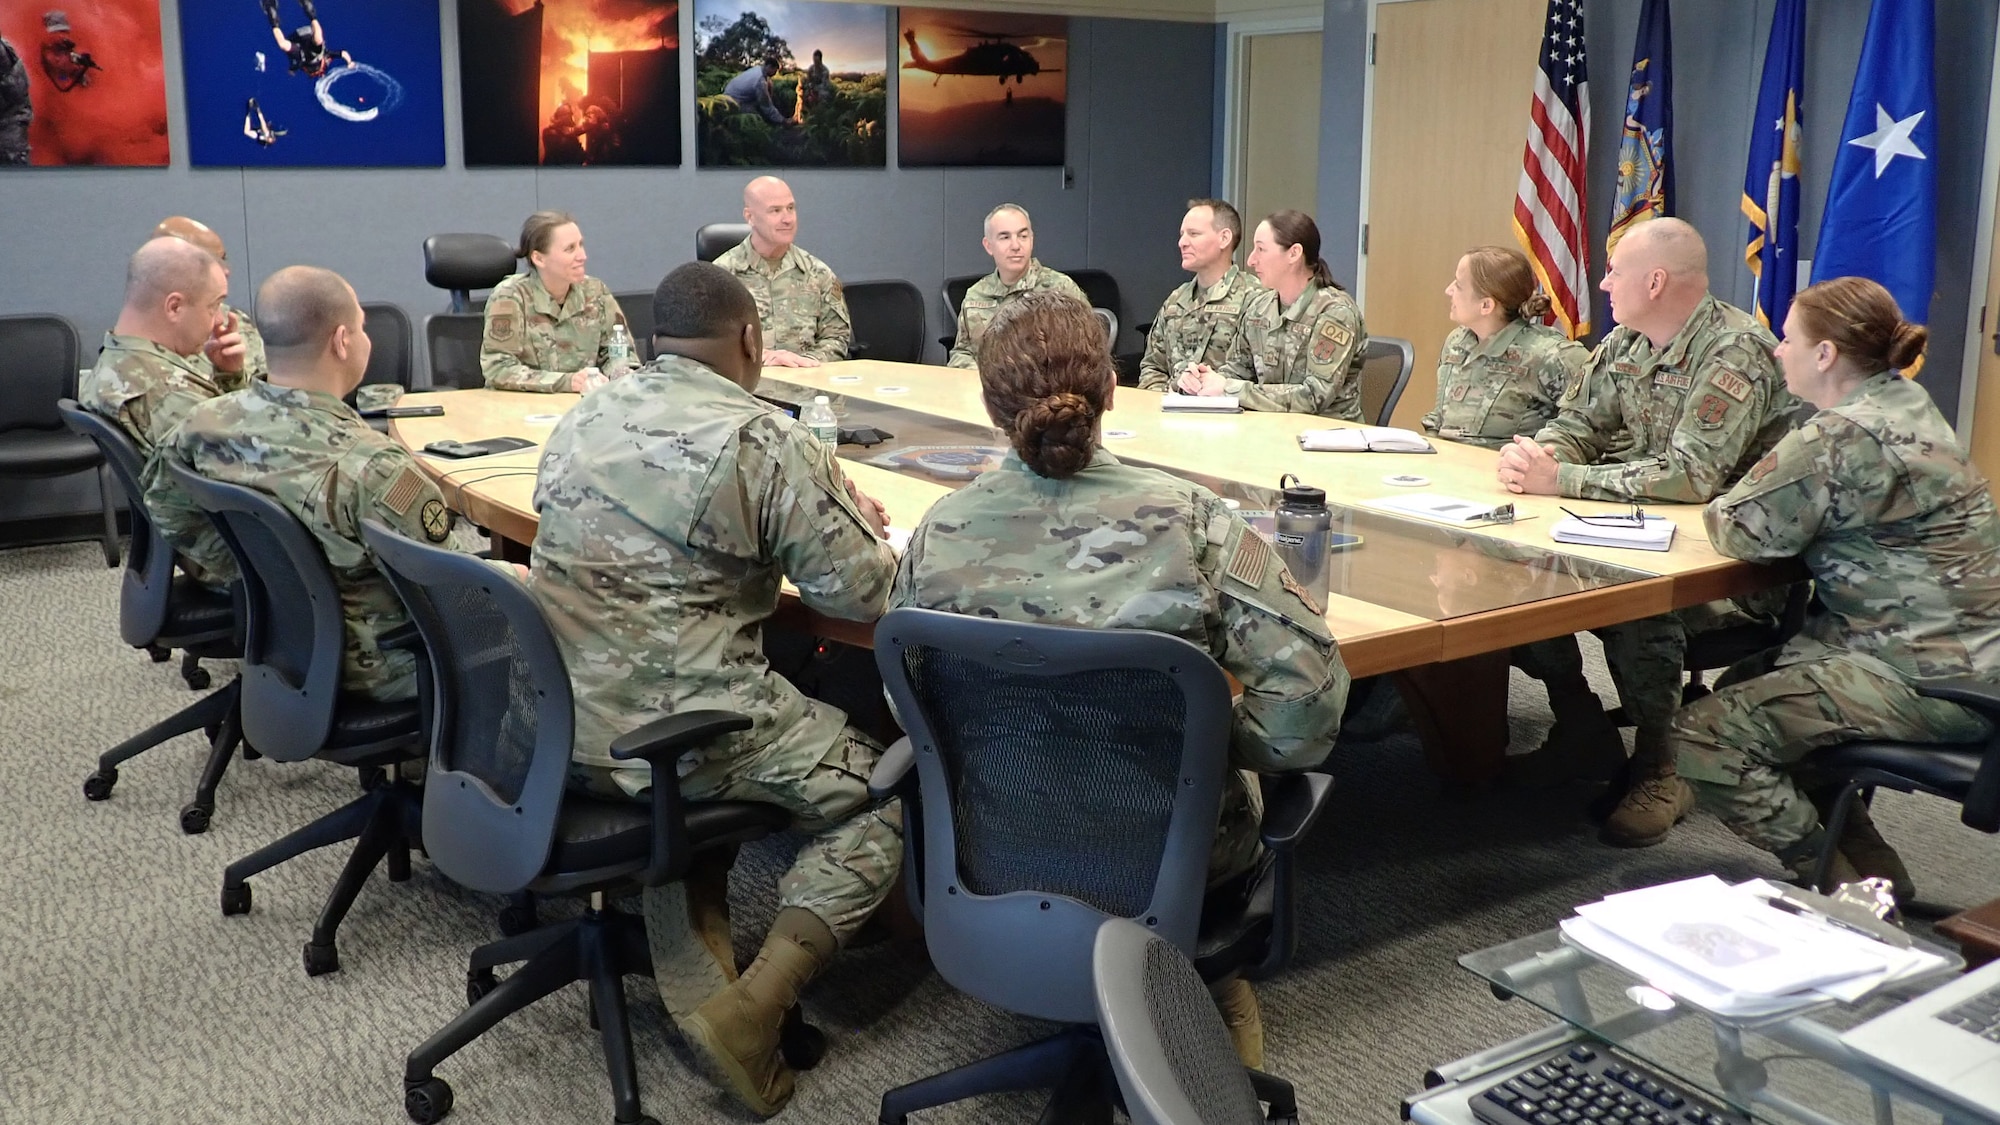 Brig. Gen. Denise Donnell, the commander of the New York Air National Guard, and Chief Master Sgt. Denny L. Richardson, New York State Command Chief, speak with the 106th Rescue Wing Senior Enlisted Leaders at Francis S. Gabreski ANGB, Westhampton Beach, N.Y., April 8, 2022. Donnell and the New York State Command Chief Master Sgt. Denny L. Richardson met with wing leadership and toured the base facilities including the communication and security forces building, fire department, medical, operations and maintenance groups. (U.S. Air National Guard photo by Lt. Cheran A. Campbell)